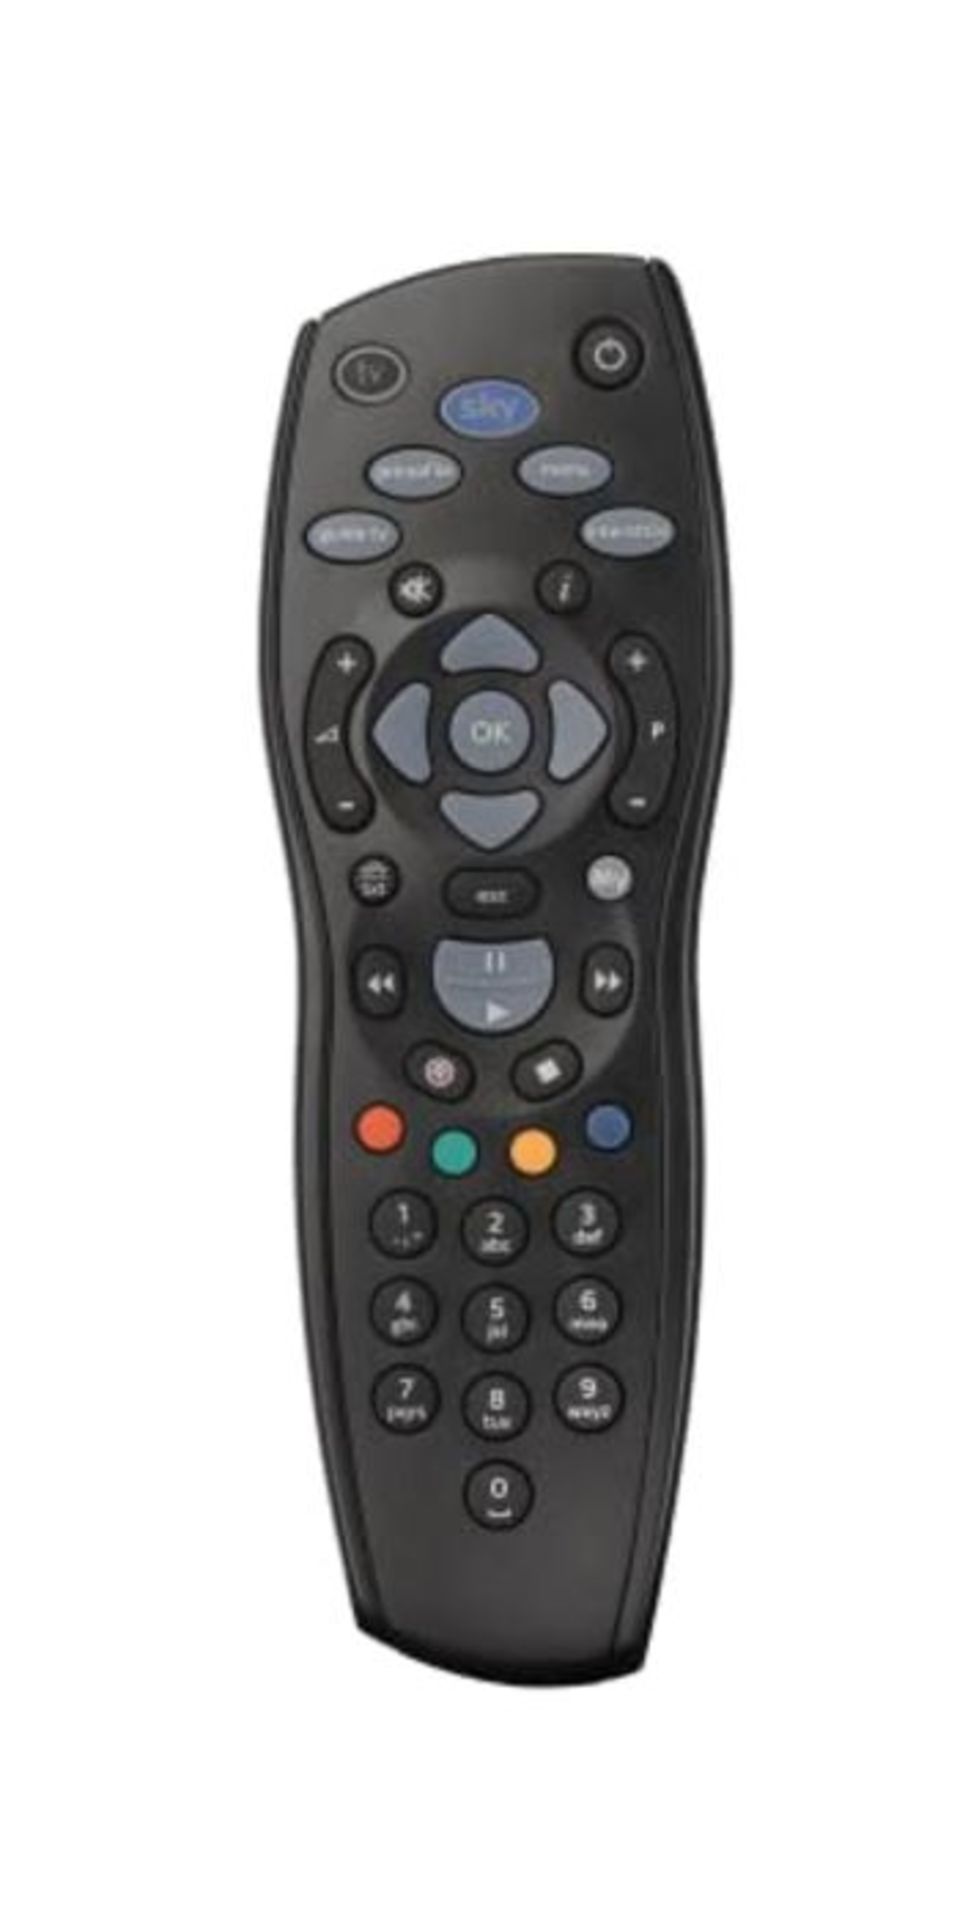 MySKY Remote Control, Includes 2 Duracell Batteries, Works with My Sky HD, My Sky and